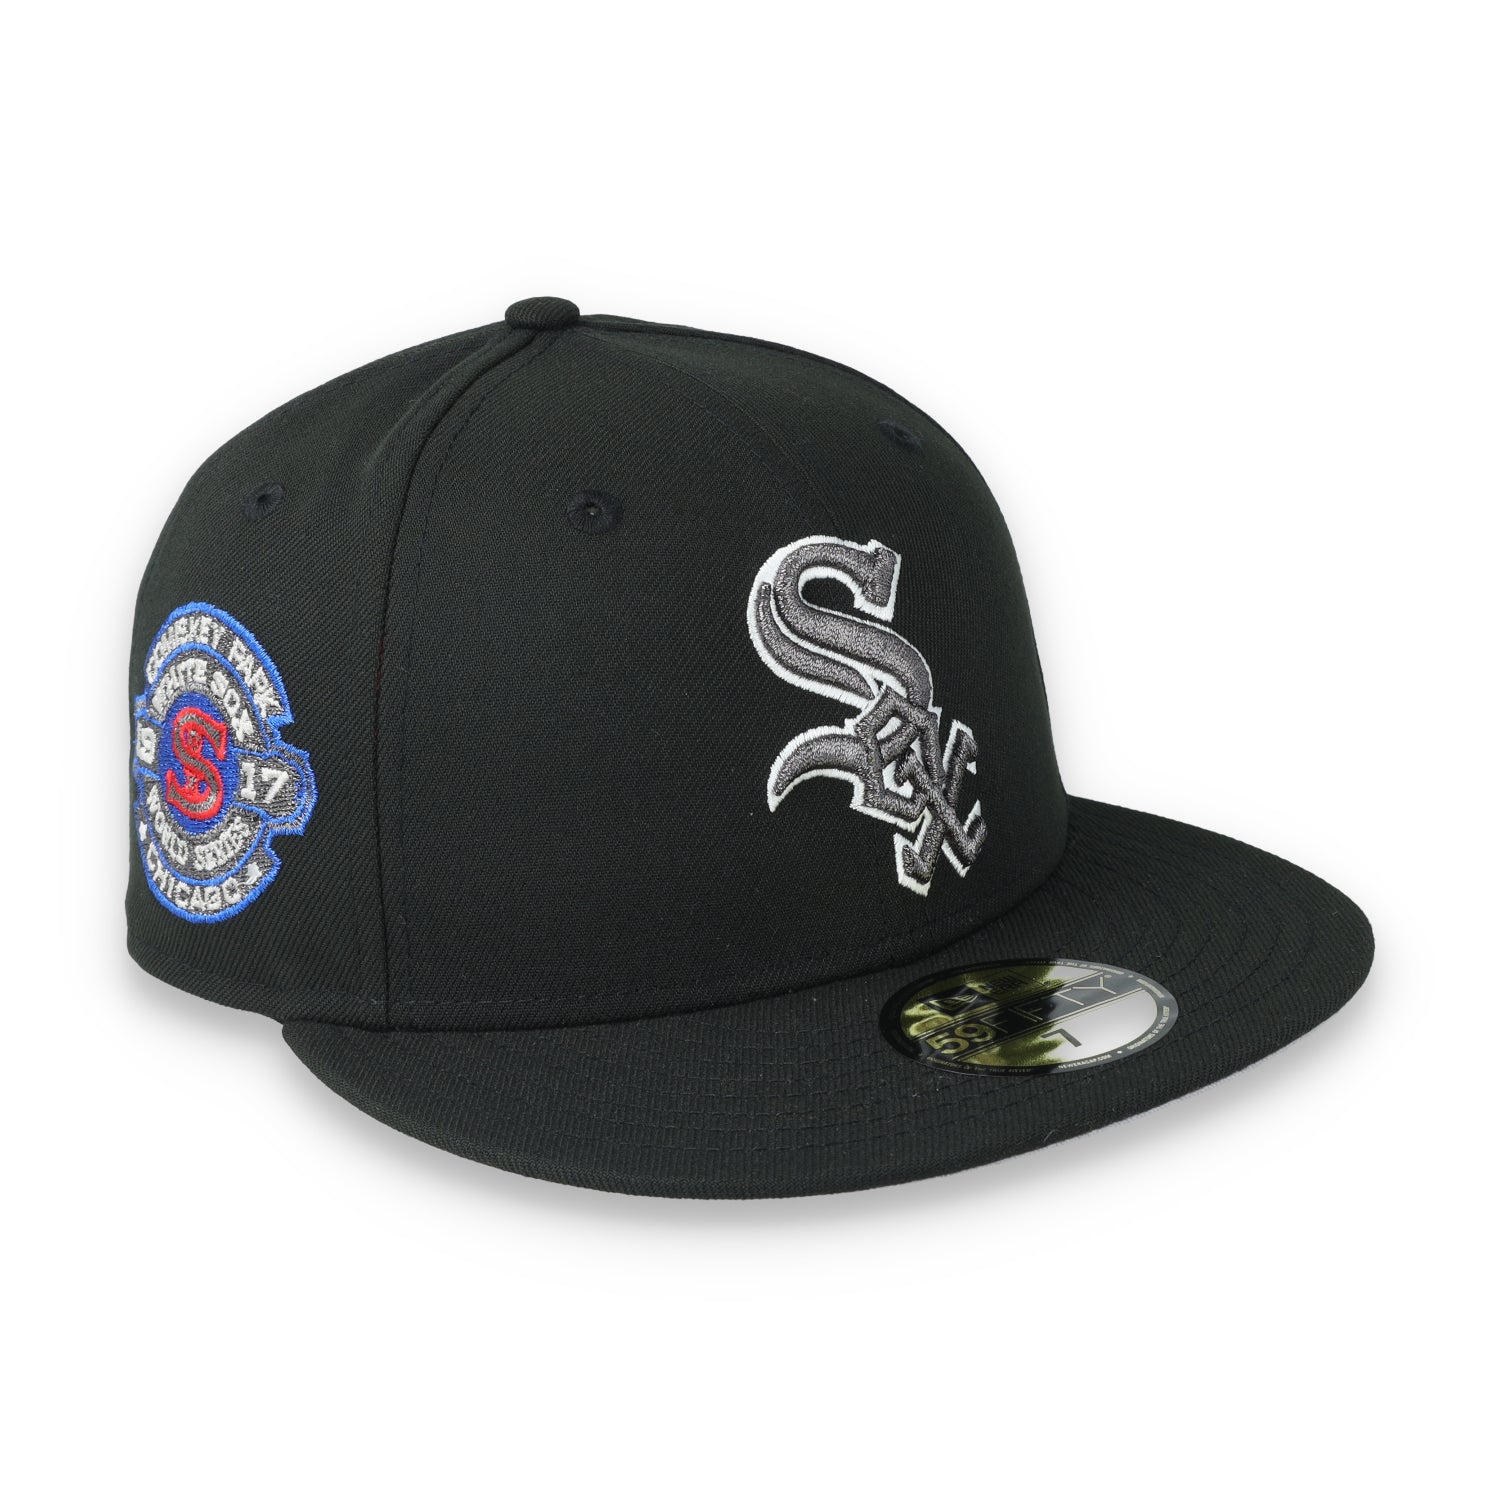 New Era Chicago White Sox 1917 World Series Side Patch 59FIFTY Fitted Hat-Metallic Grey/Black